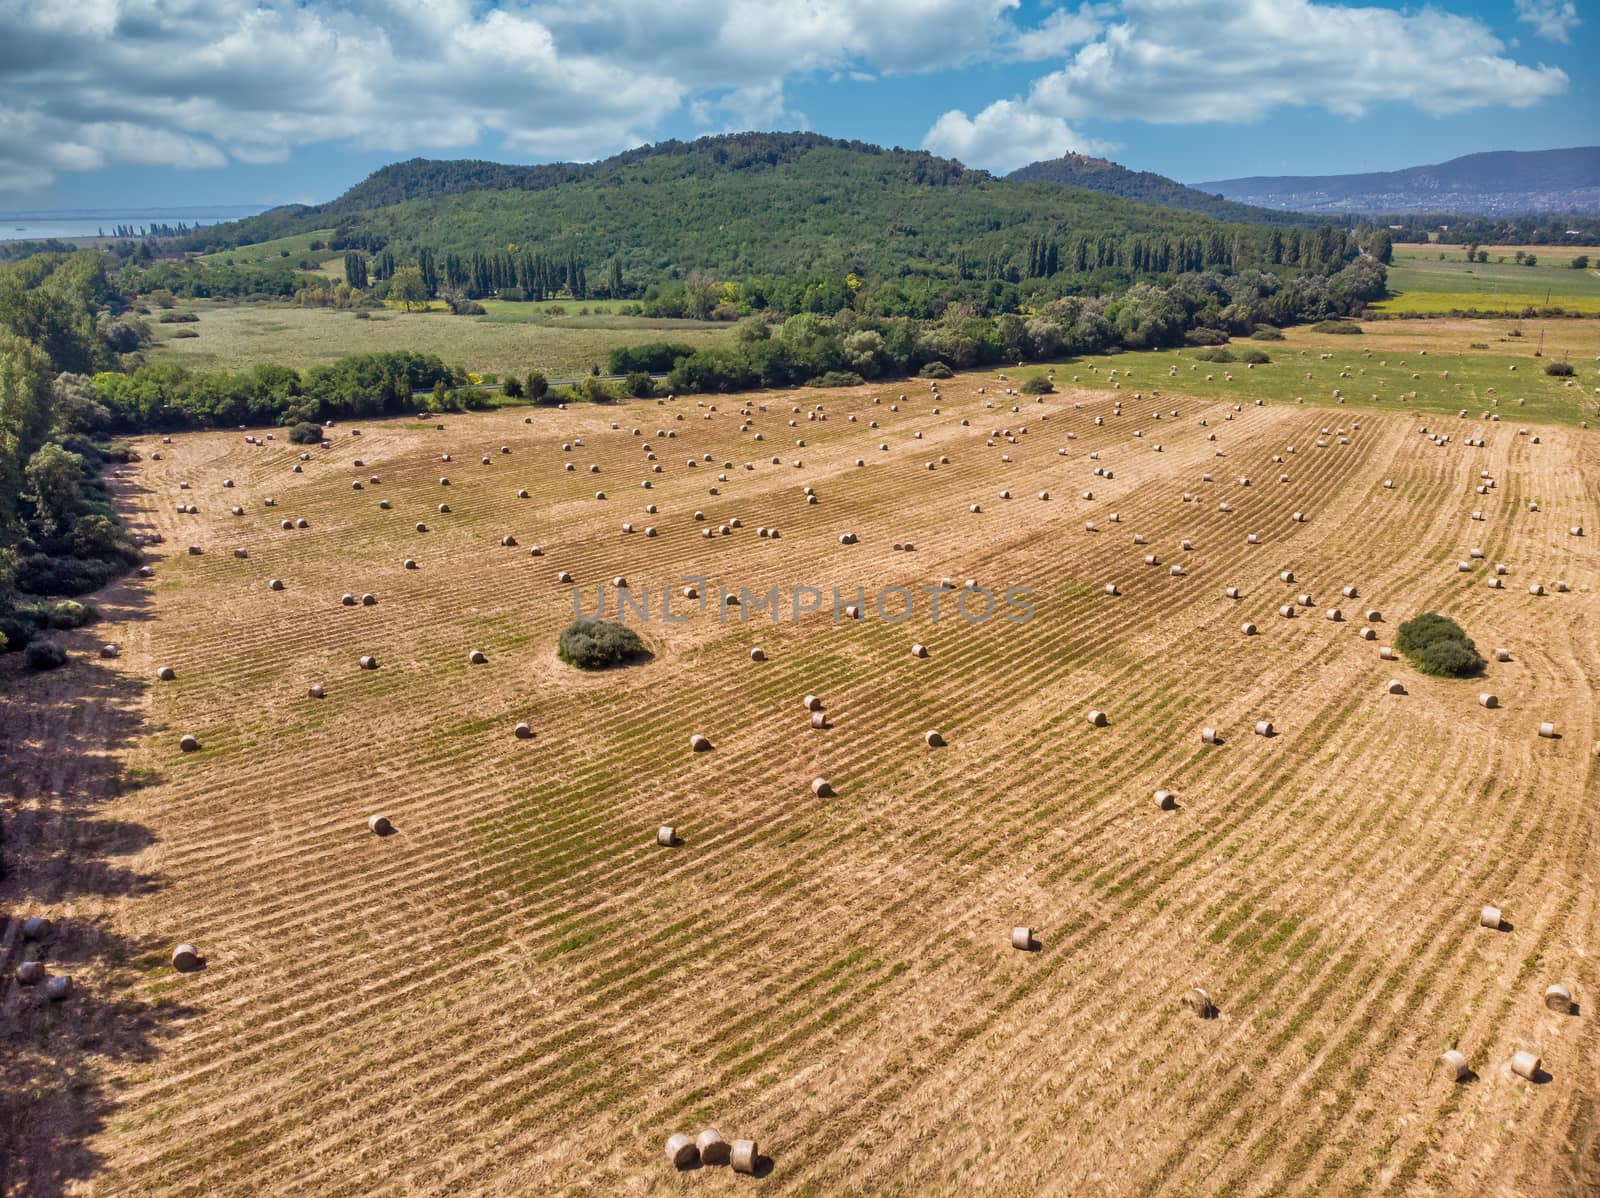 Bales of hay on the field after harvest shot by drone,Hungary ne by Digoarpi